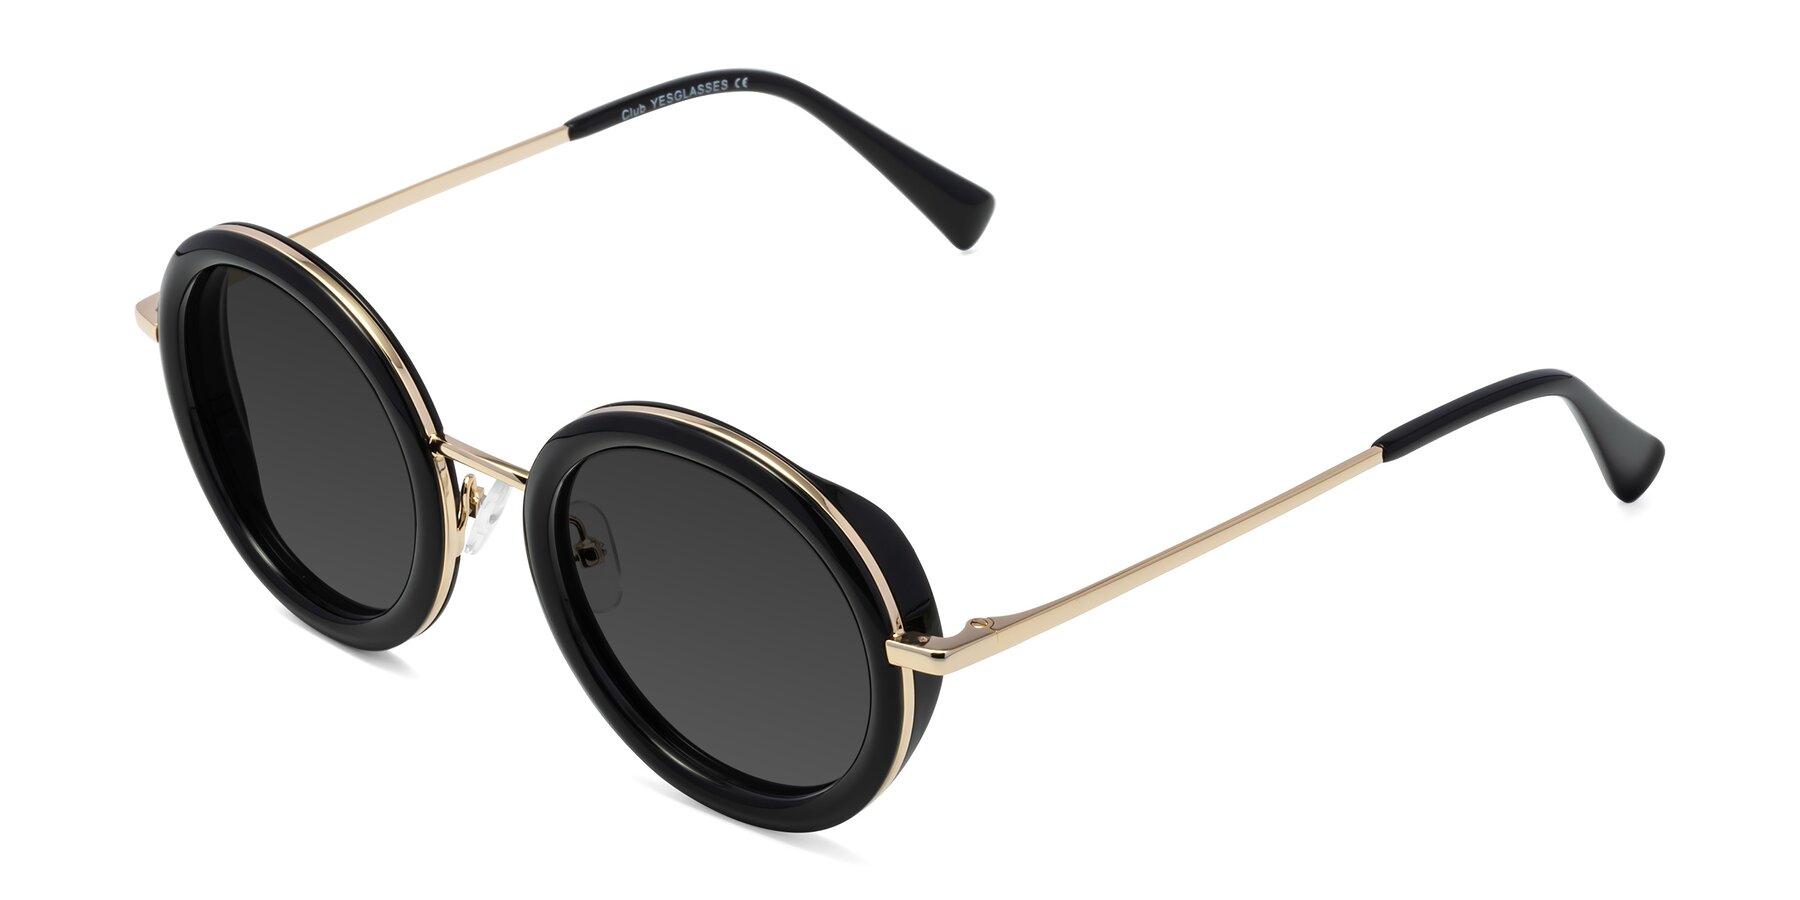 Angle of Club in Black-Gold with Gray Tinted Lenses